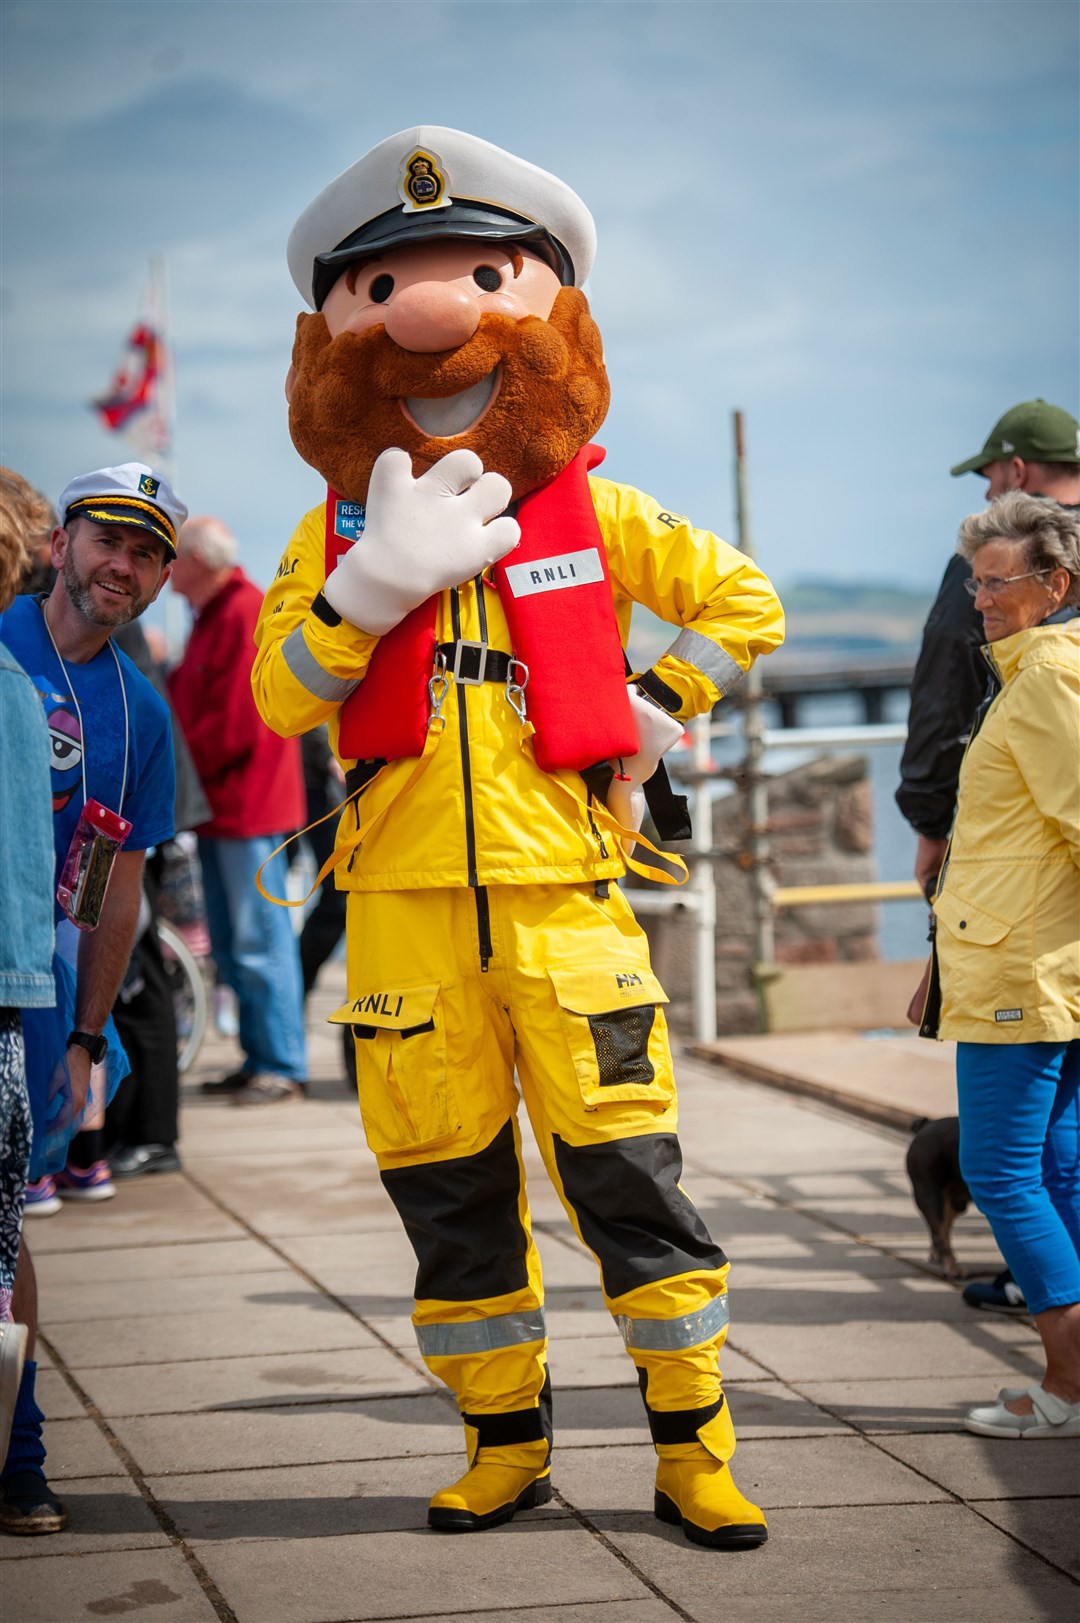 In the absence of events such as the Invergordon RNLI open day, the local lifeboat team is looking at alternative fundraising ventures. This first is a fun run with a difference next week. Picture: Callum Mackay